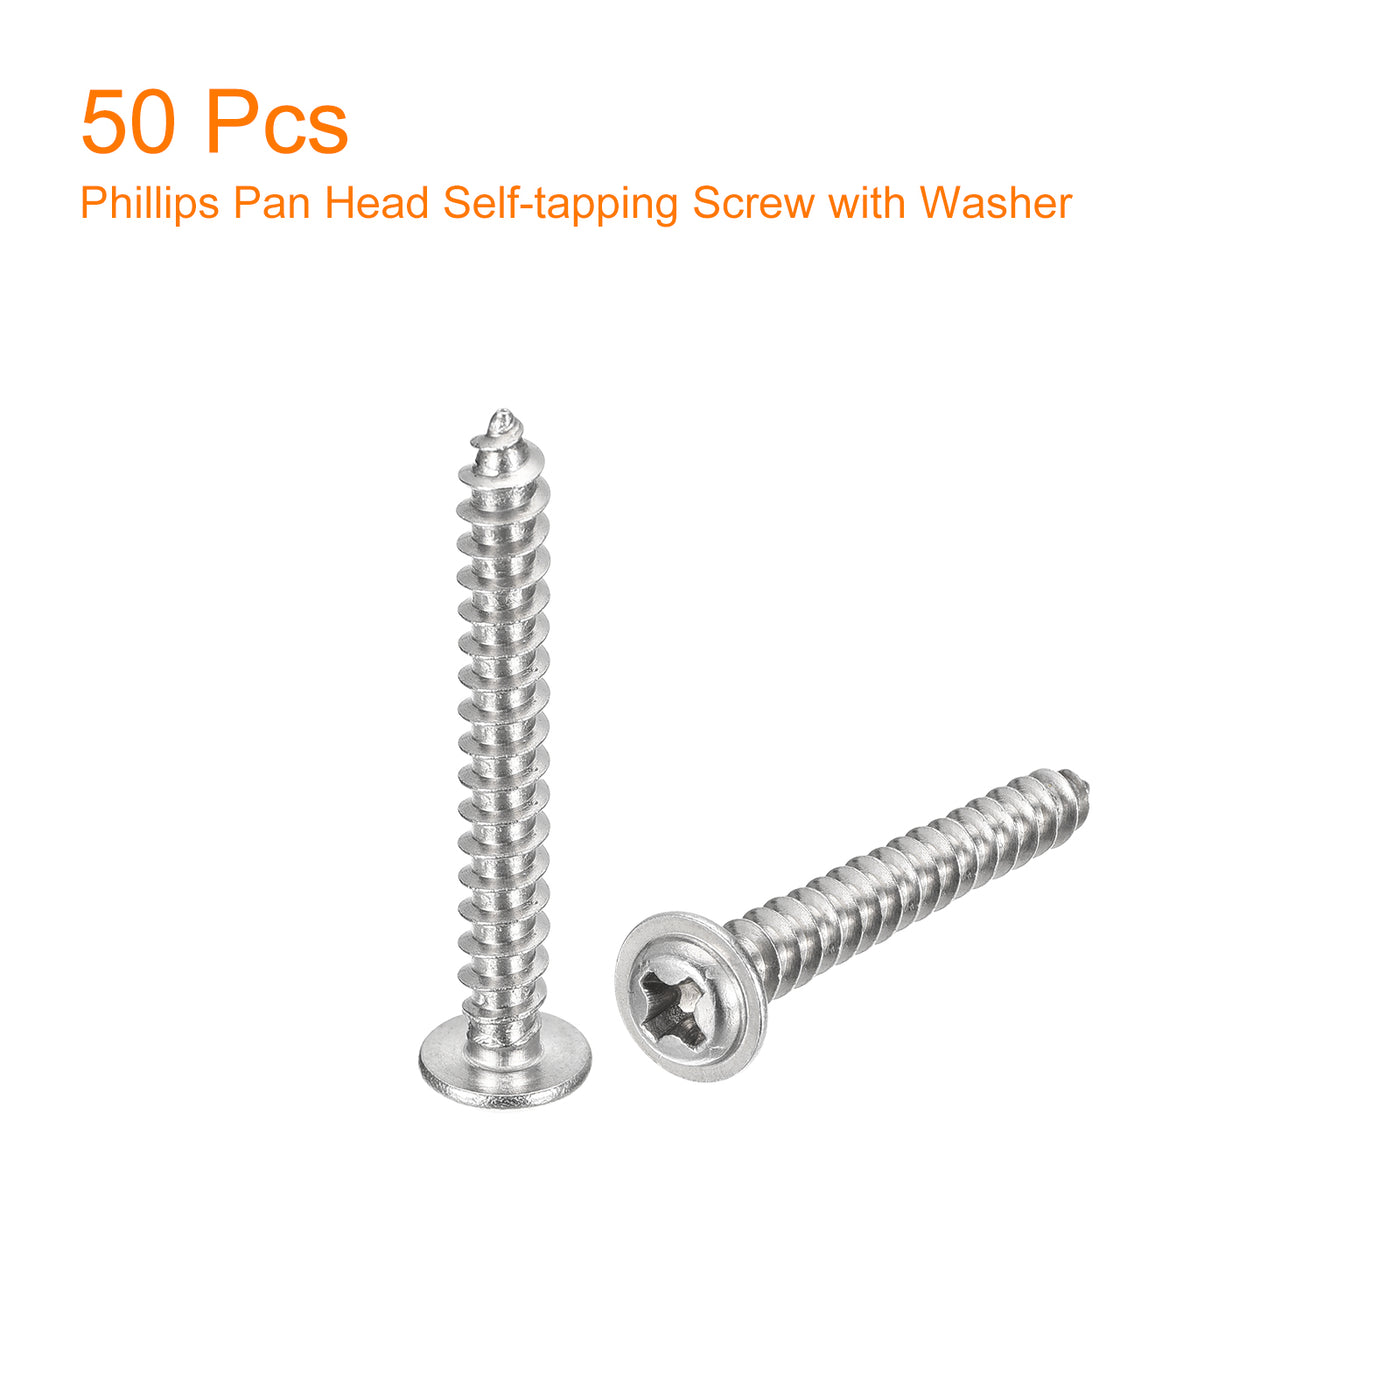 uxcell Uxcell ST4x30mm Phillips Pan Head Self-tapping Screw with Washer, 50pcs - 304 Stainless Steel Wood Screw Full Thread (Silver)